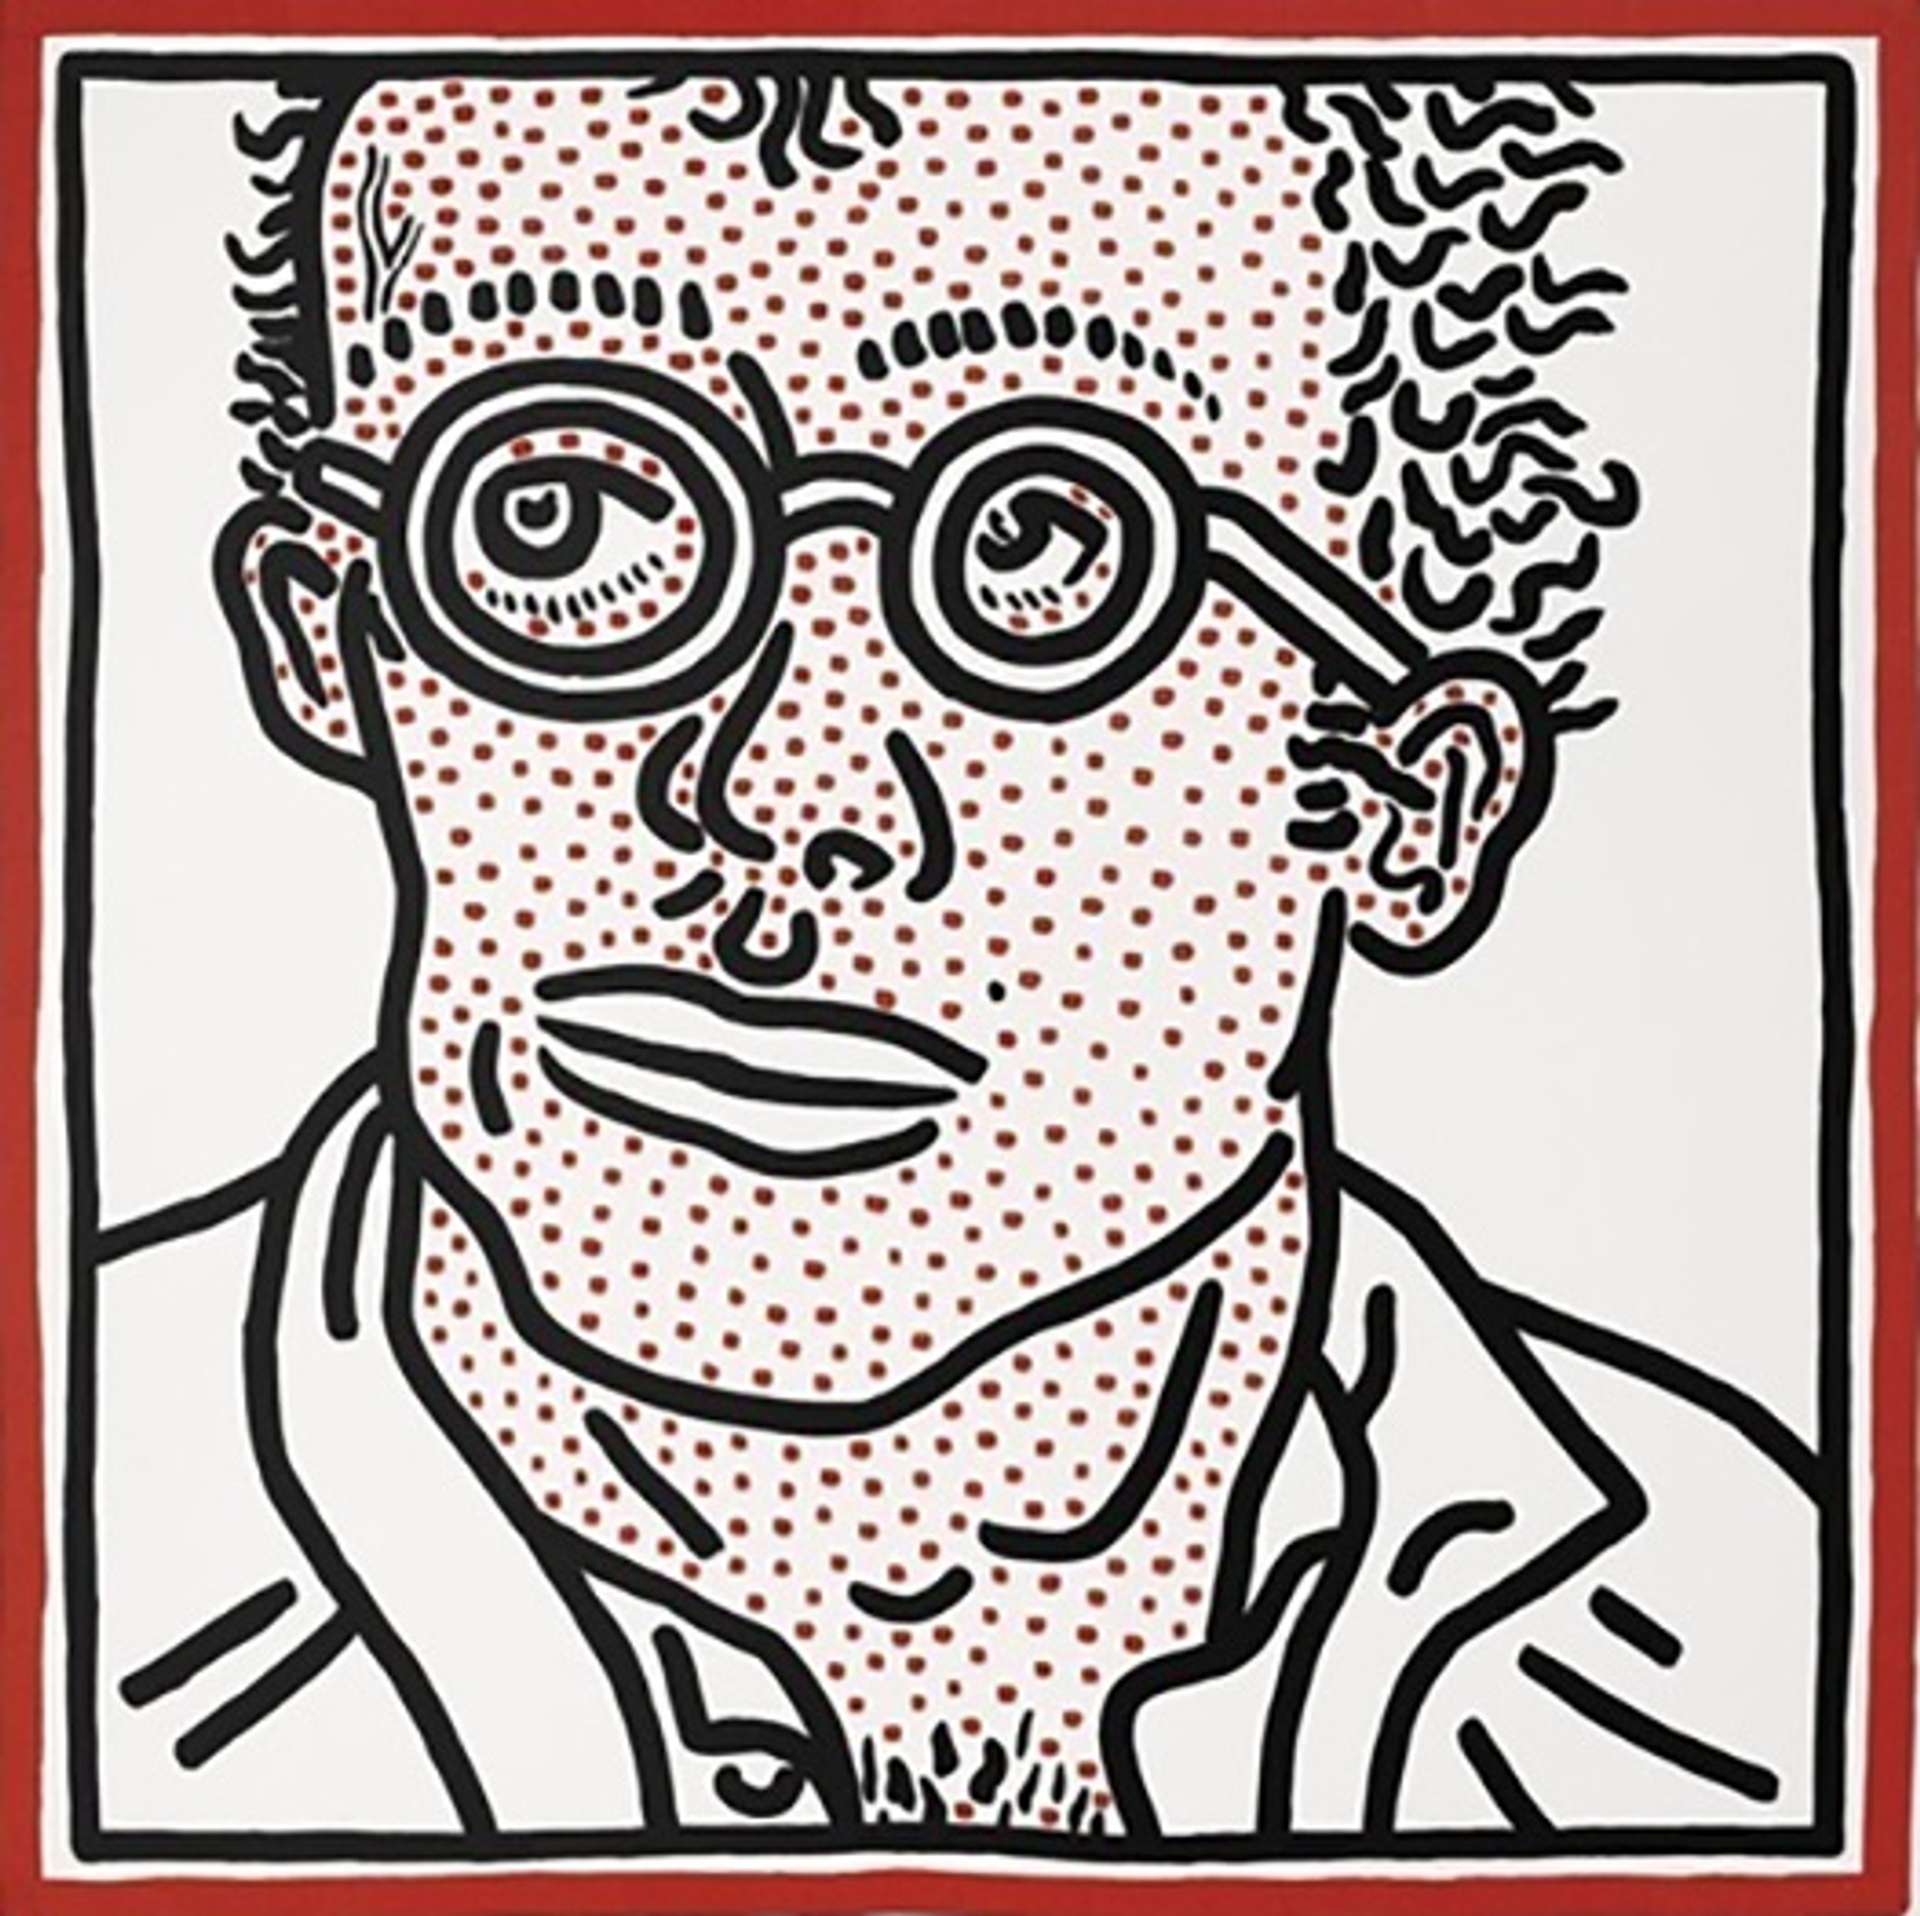 Self-Portrait For Tony by Keith Haring